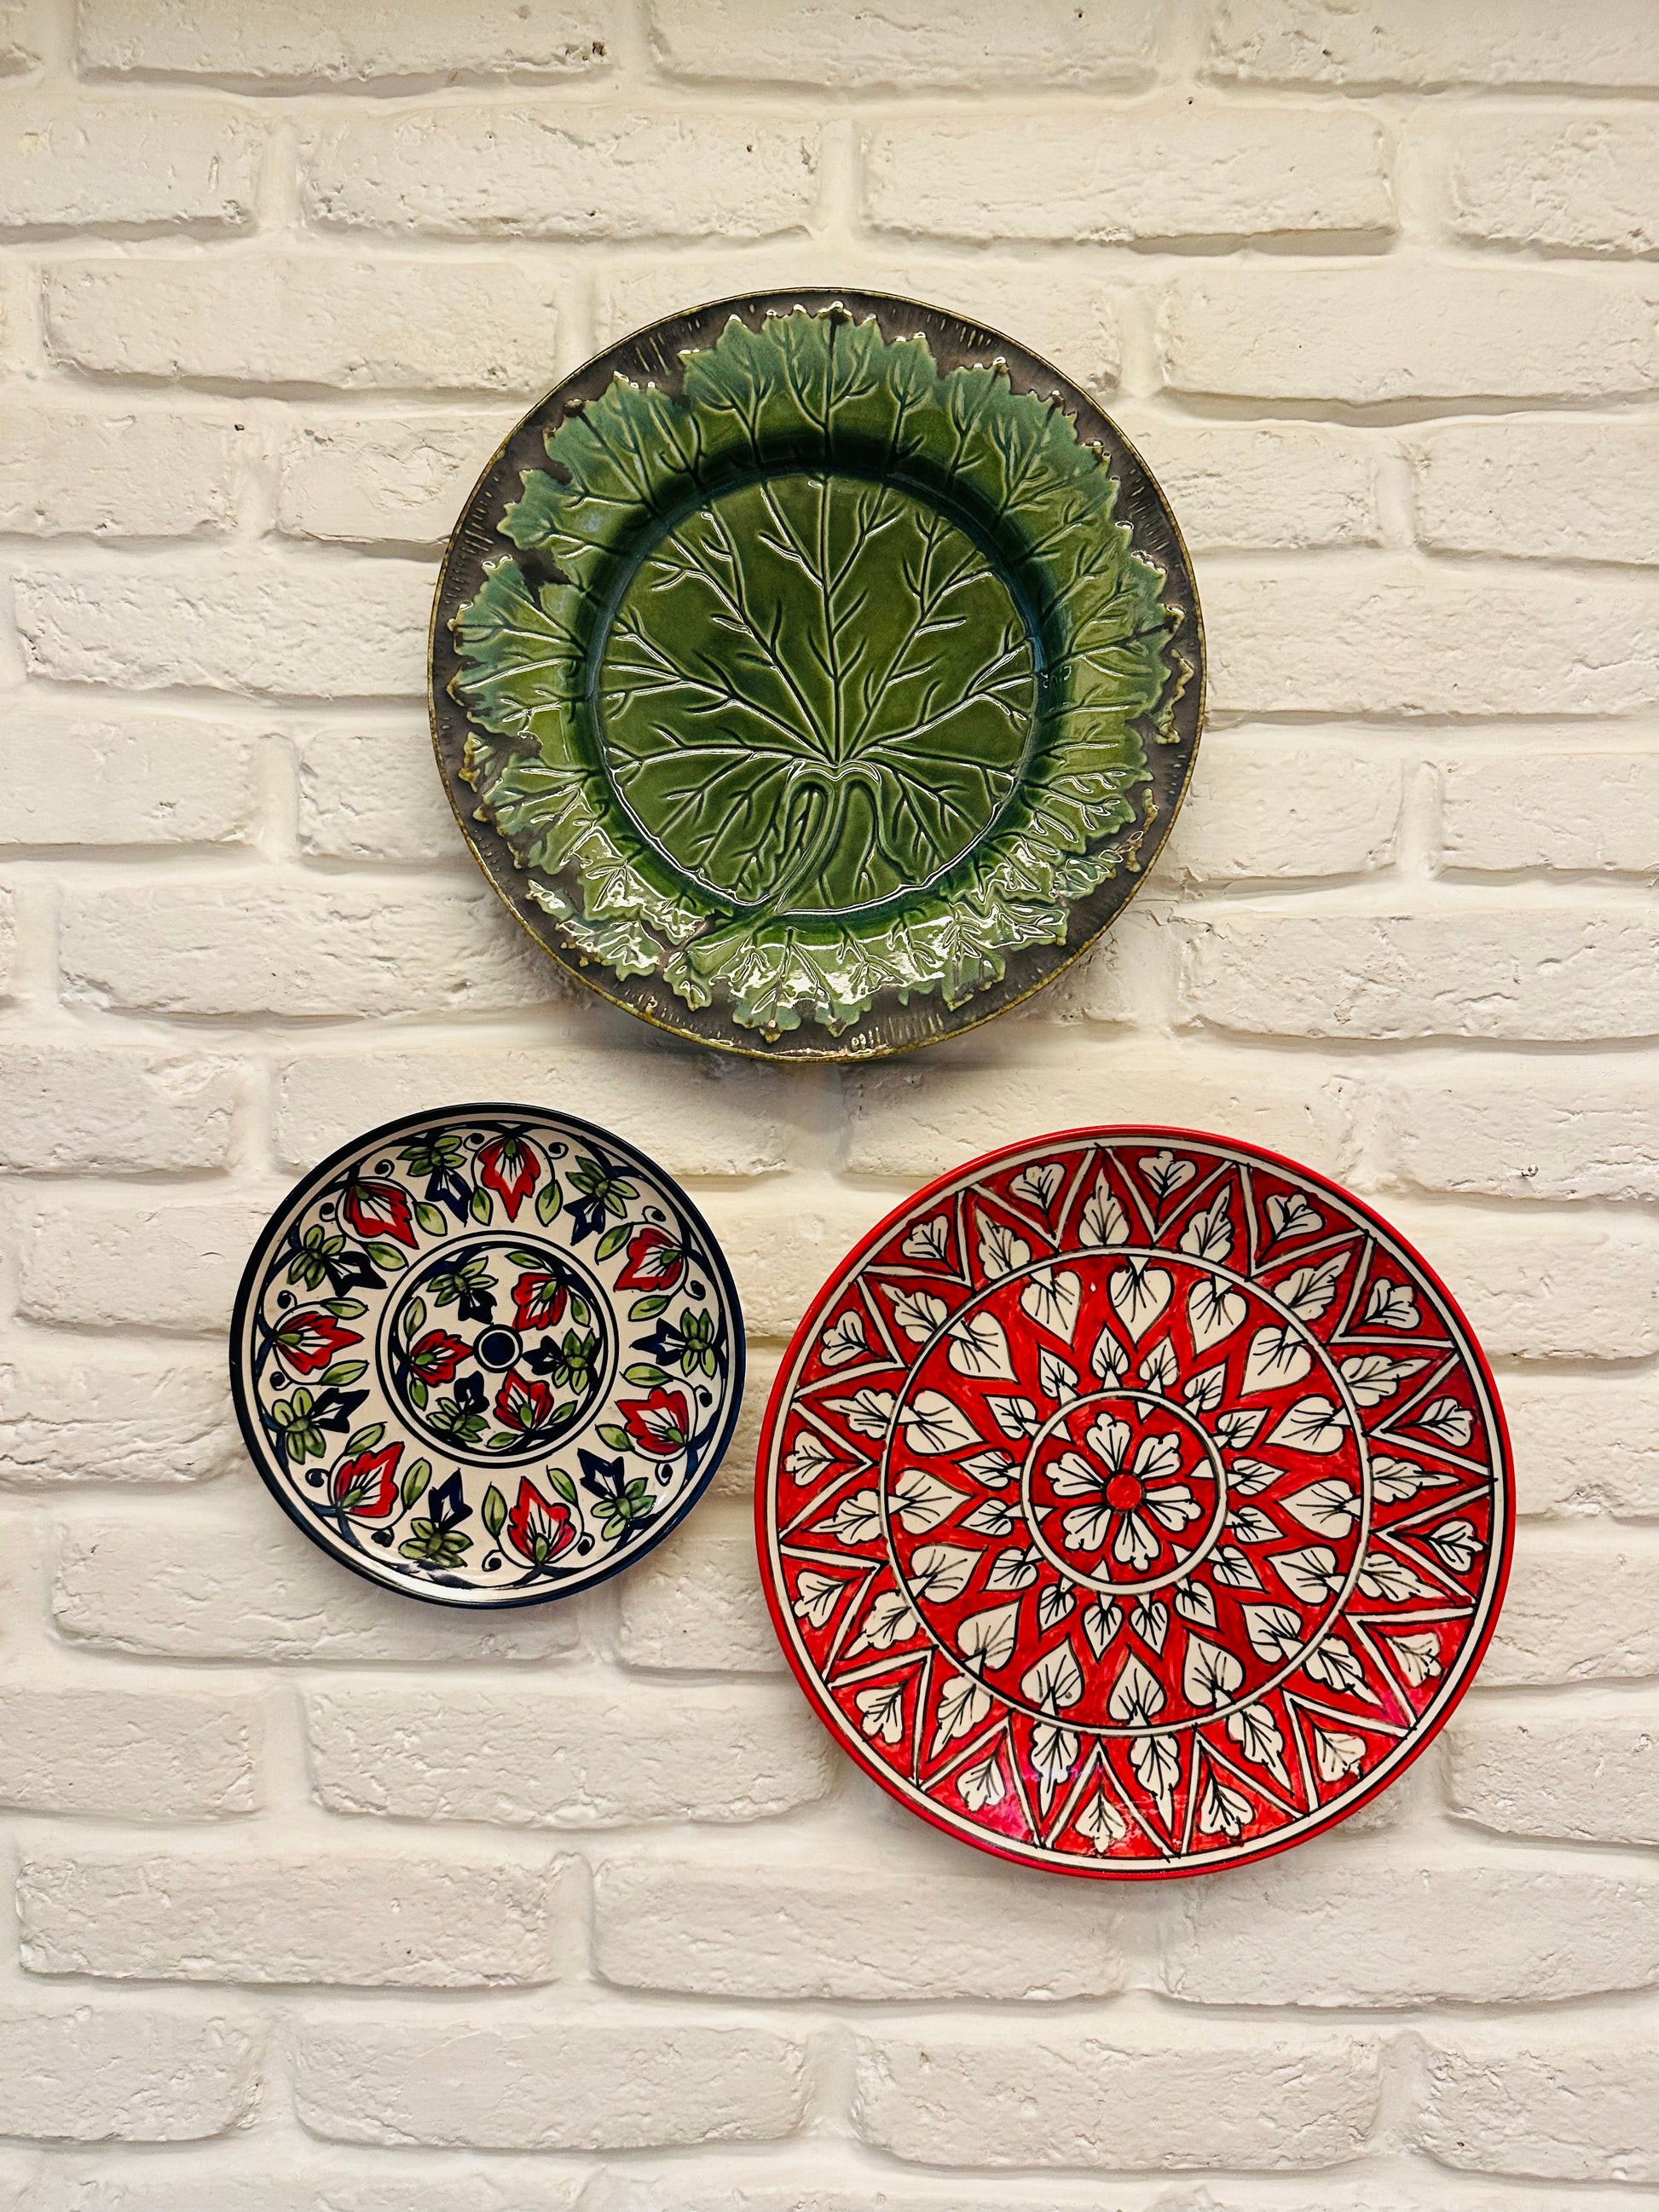  Artisanal Wall Plate Collection, Bedroom Wall Plate Ensemble, Classical Appeal Wall Décor, Classical Indian Wall Décor, Hand Painted Artisanal Plates, Handcrafted Home Accents, Handcrafted Indian Artisans, Indian Artisan Wall Décor, Lily Designer Hand Painted Wall Plates, Small Batch High-Quality Décor, Unique Handcrafted Wall Plates, Unique Living Room Décor, Vibrant Lily Wall Art, Vibrant Wall Accent Pieces, Wall Hanging Hook Included, tesu